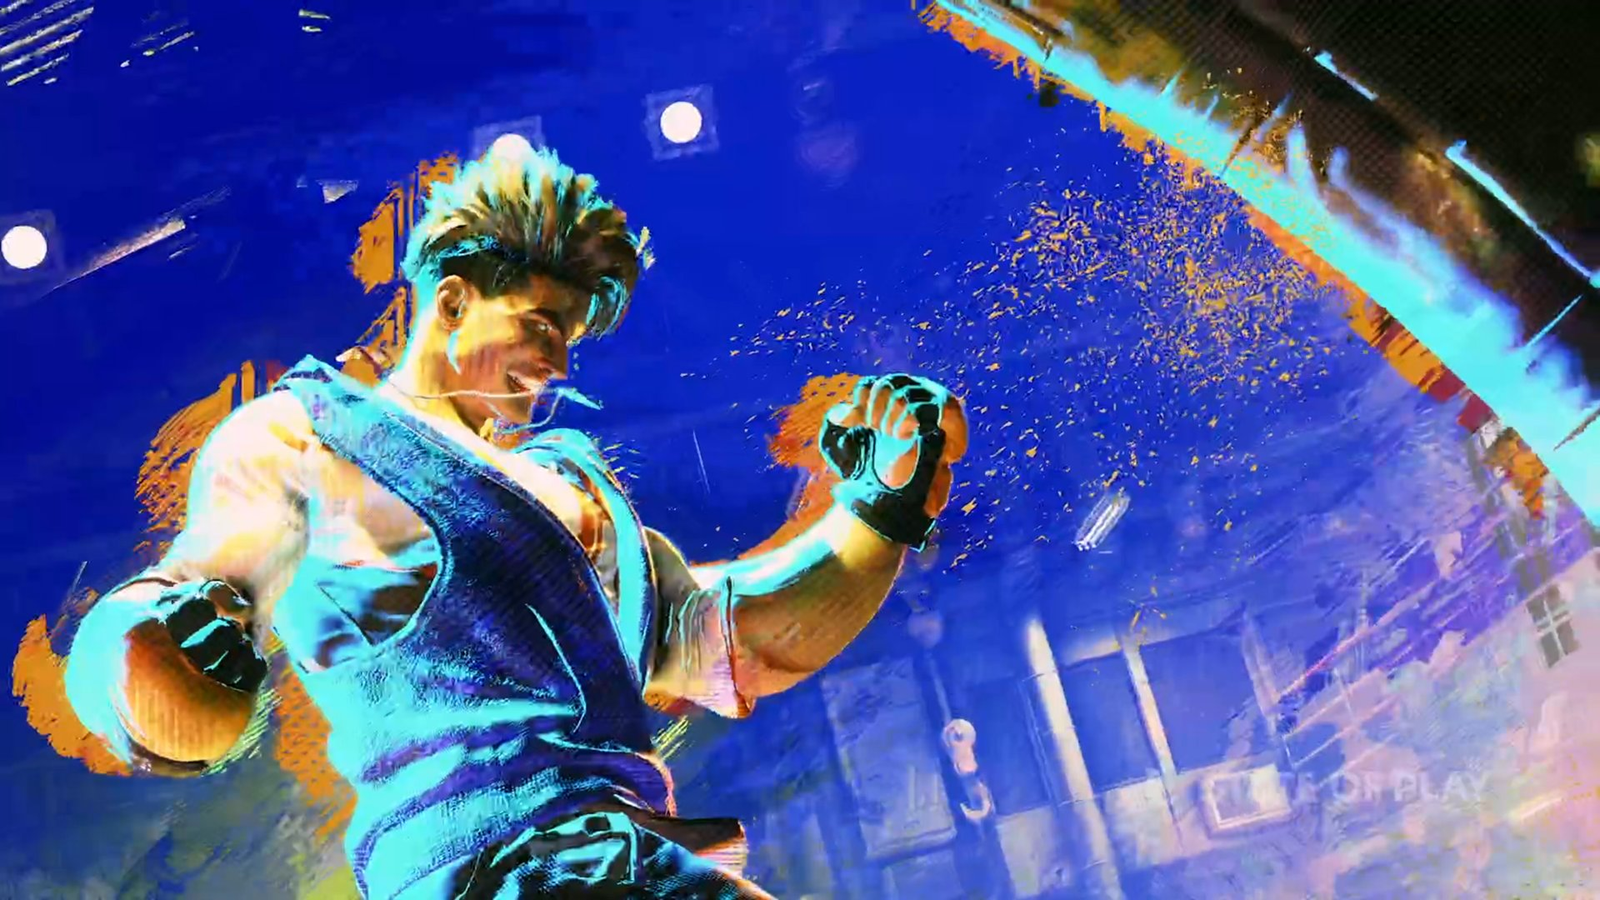 PlayStation State of Play June 2022: Street Fighter 6, FF16, Resident Evil  4 Remake and more